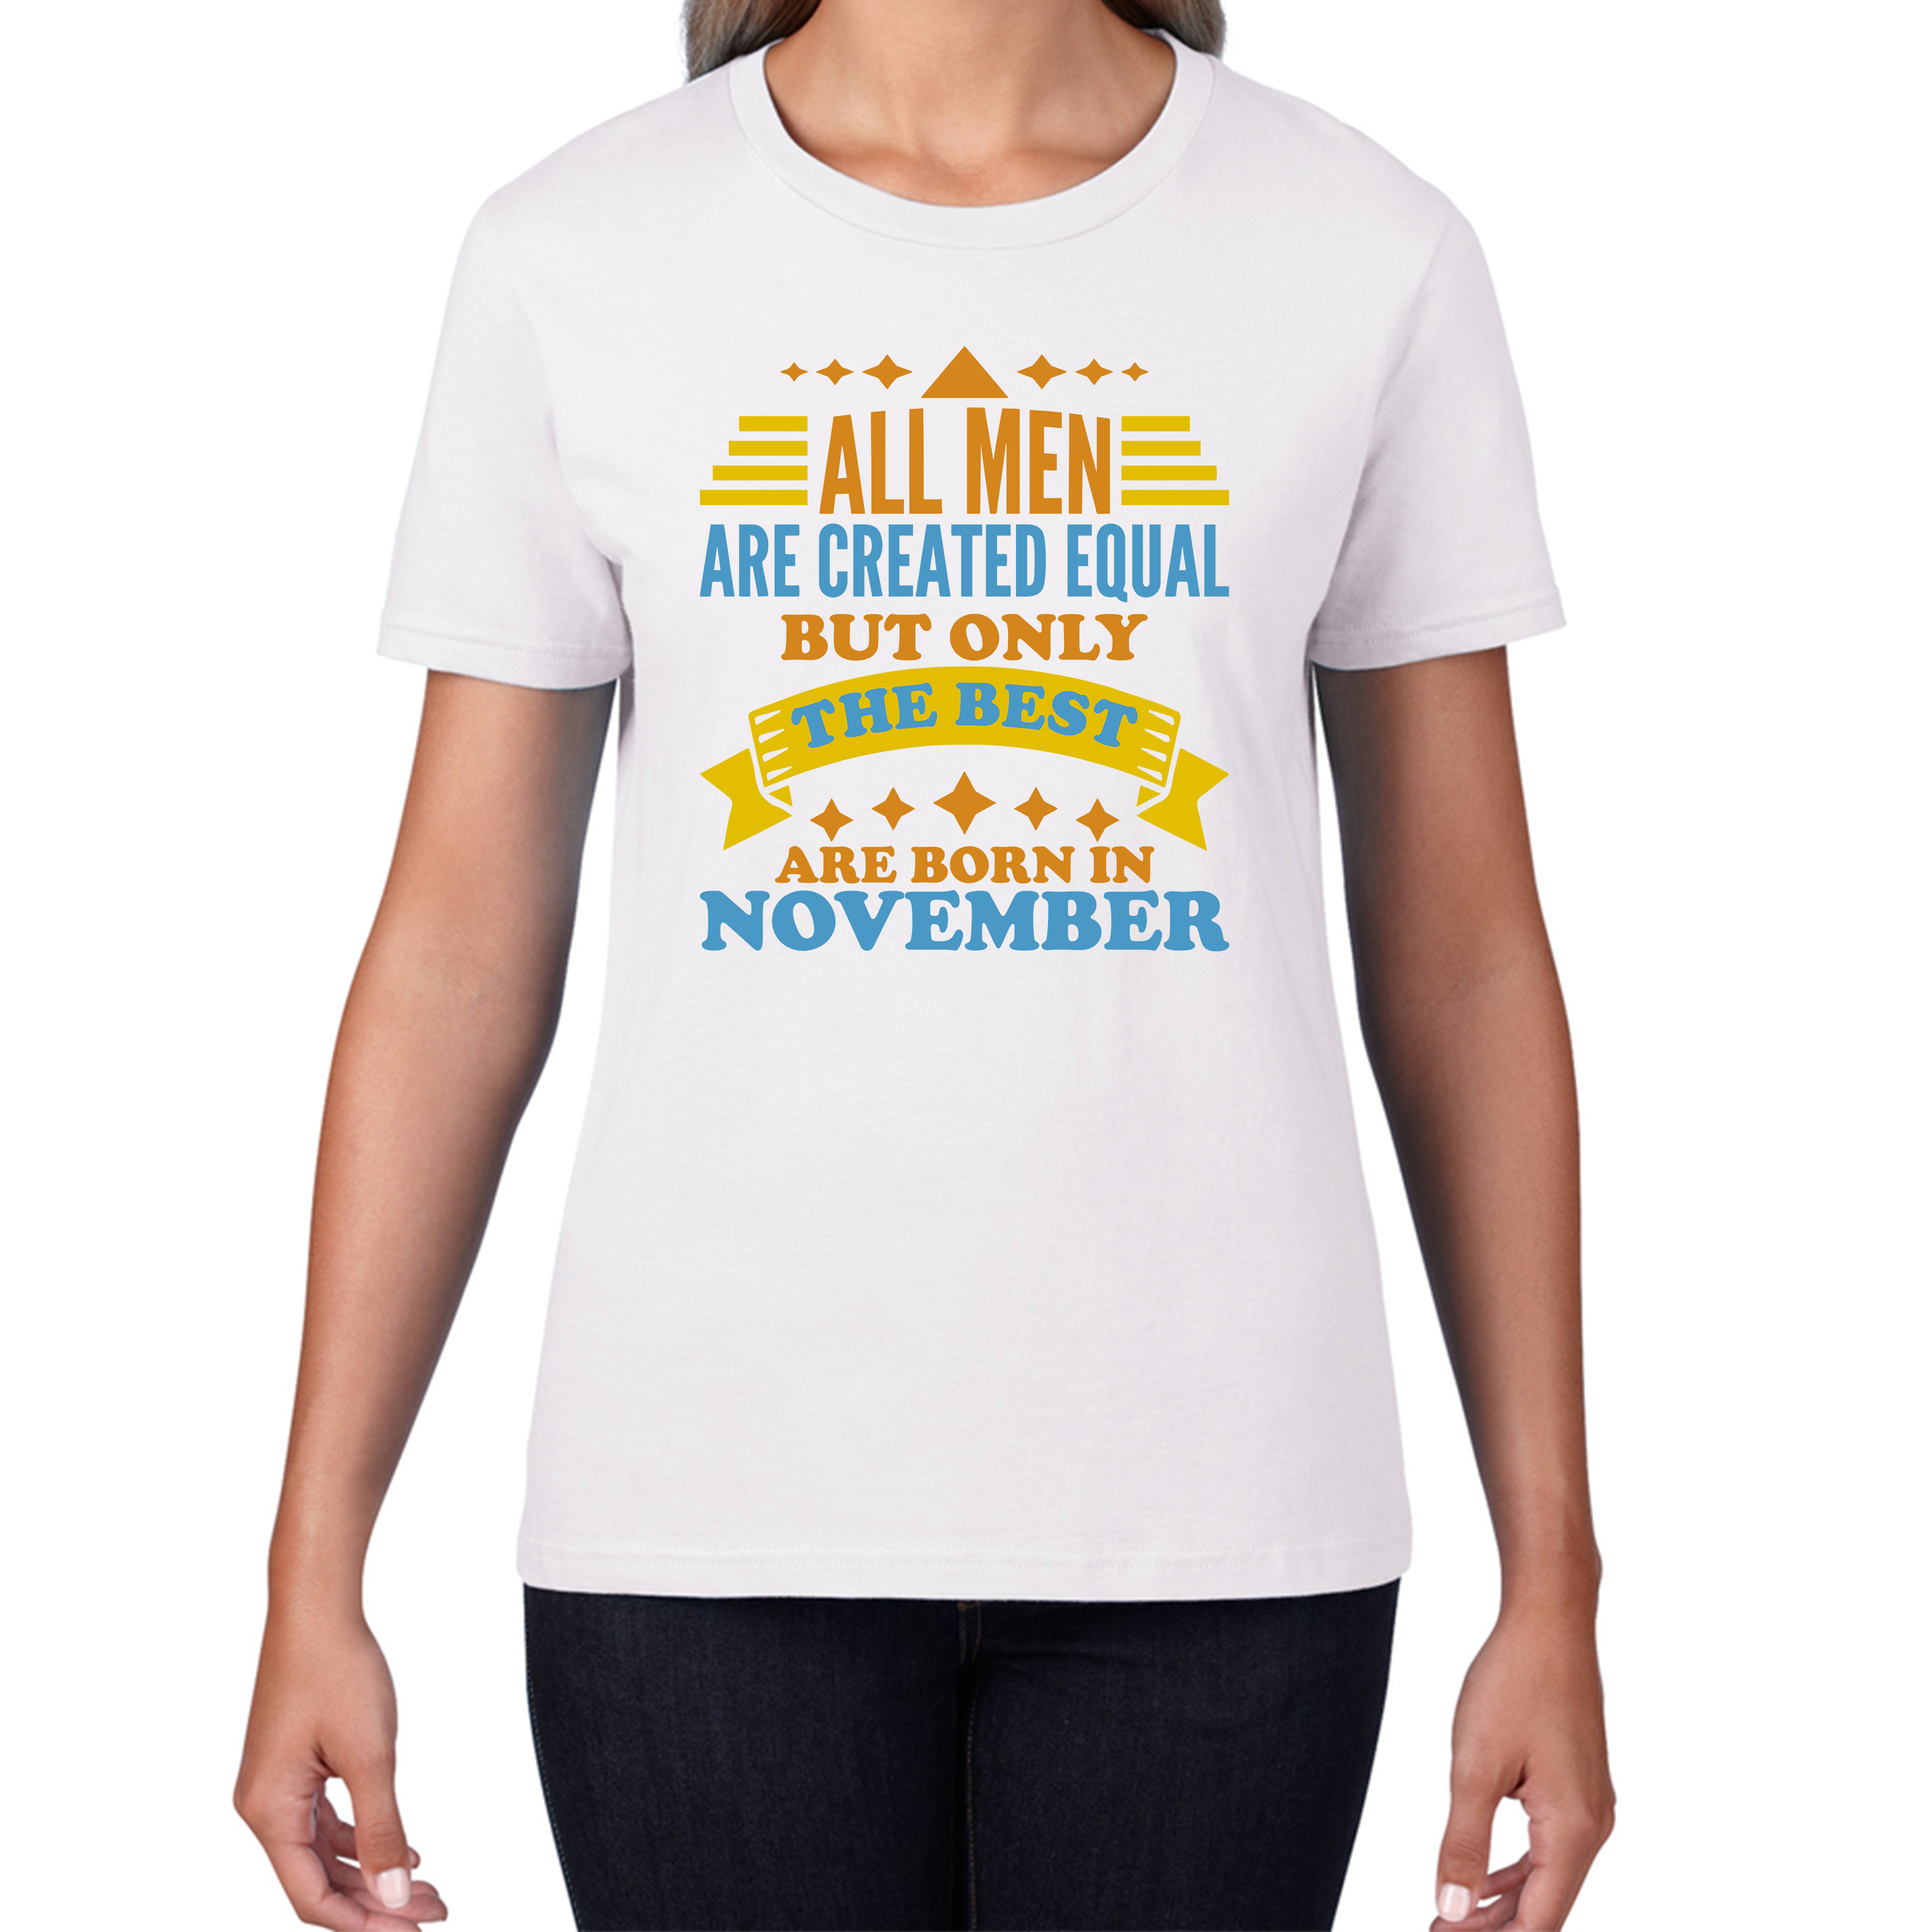 All Women Are Created Equal But Only The Best Are Born In November Funny Birthday Quote Womens Tee Top